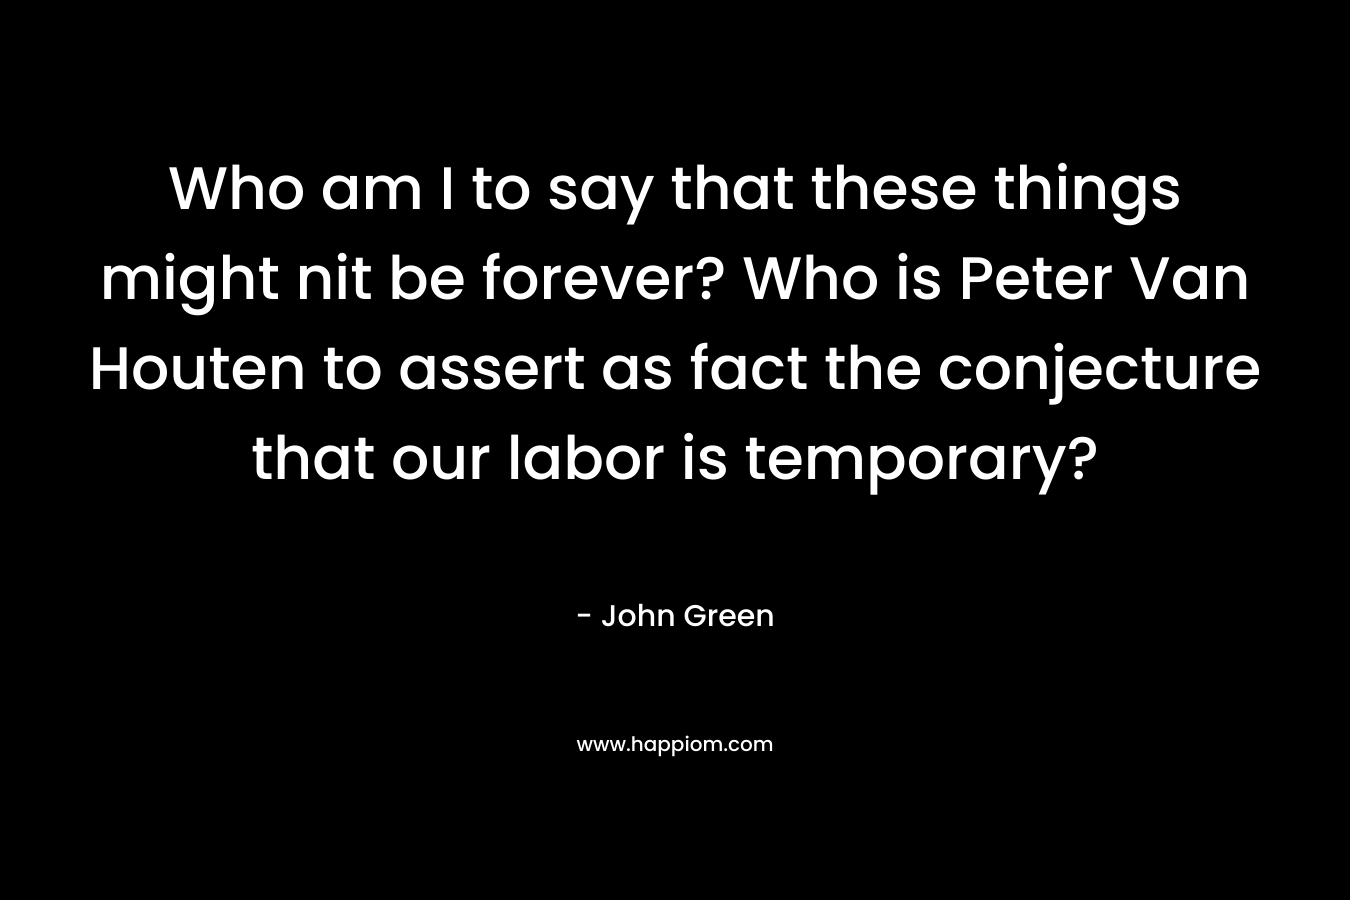 Who am I to say that these things might nit be forever? Who is Peter Van Houten to assert as fact the conjecture that our labor is temporary? – John Green